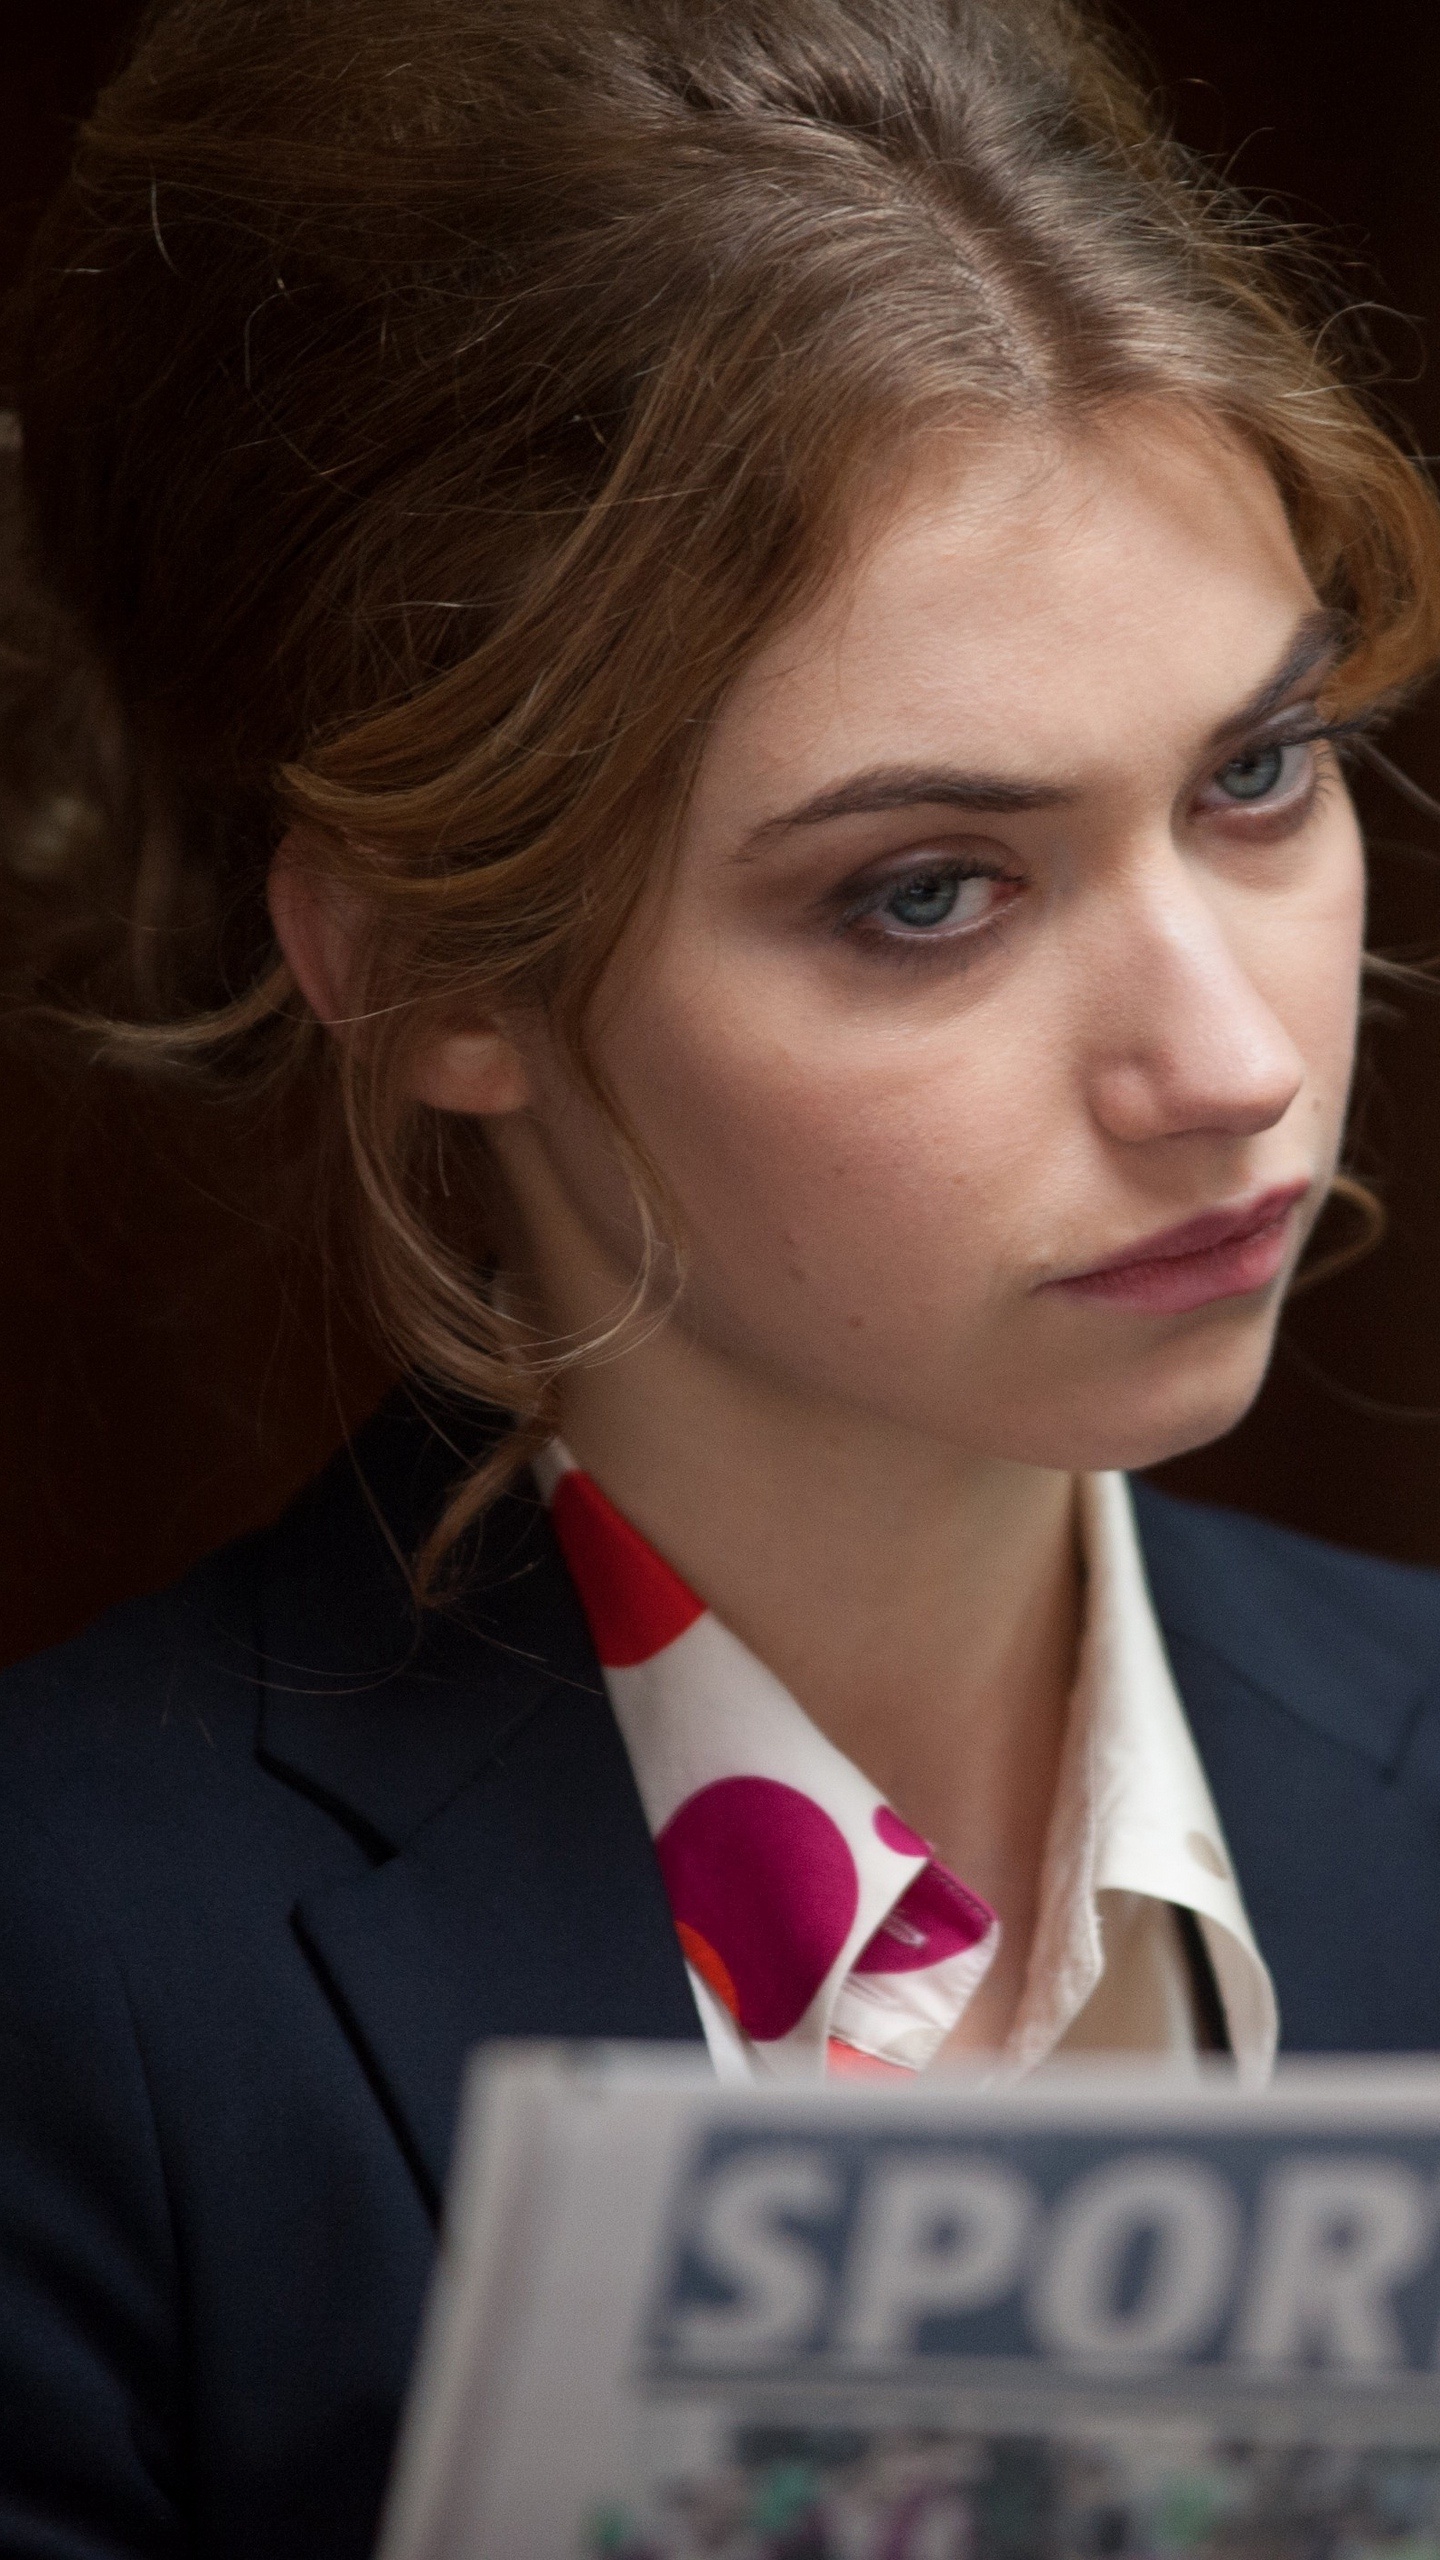 Imogen Poots movies, Fan-posted wallpapers, Christopher Thompson's collection, High-quality images, 1440x2560 HD Handy